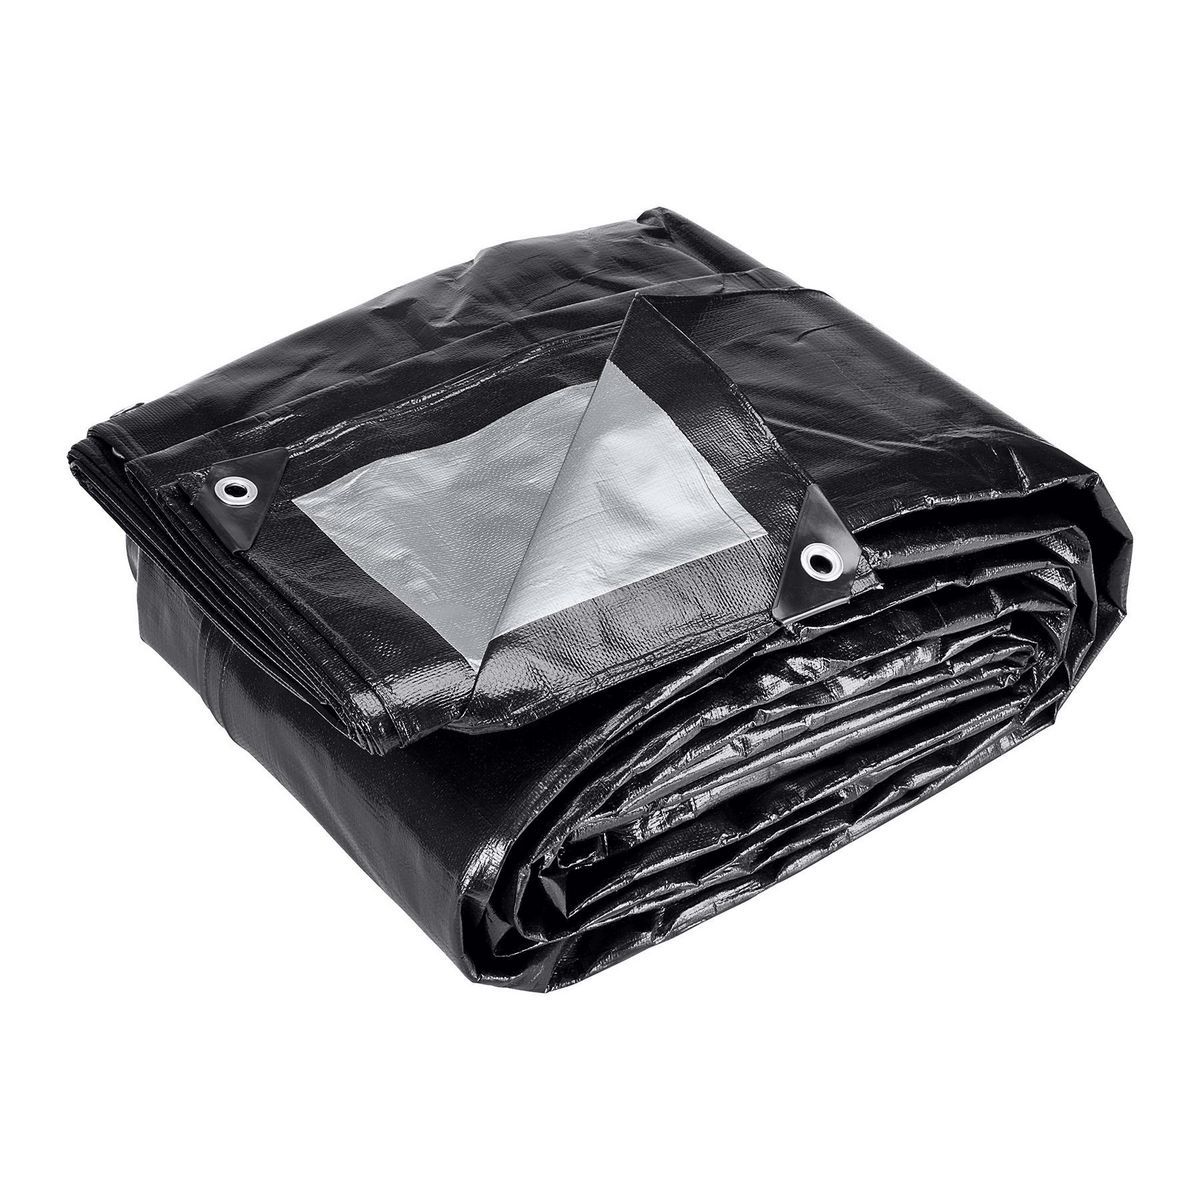 18 ft. x 24 ft. Silver and Black Extreme Duty Weather Resistant Tarp